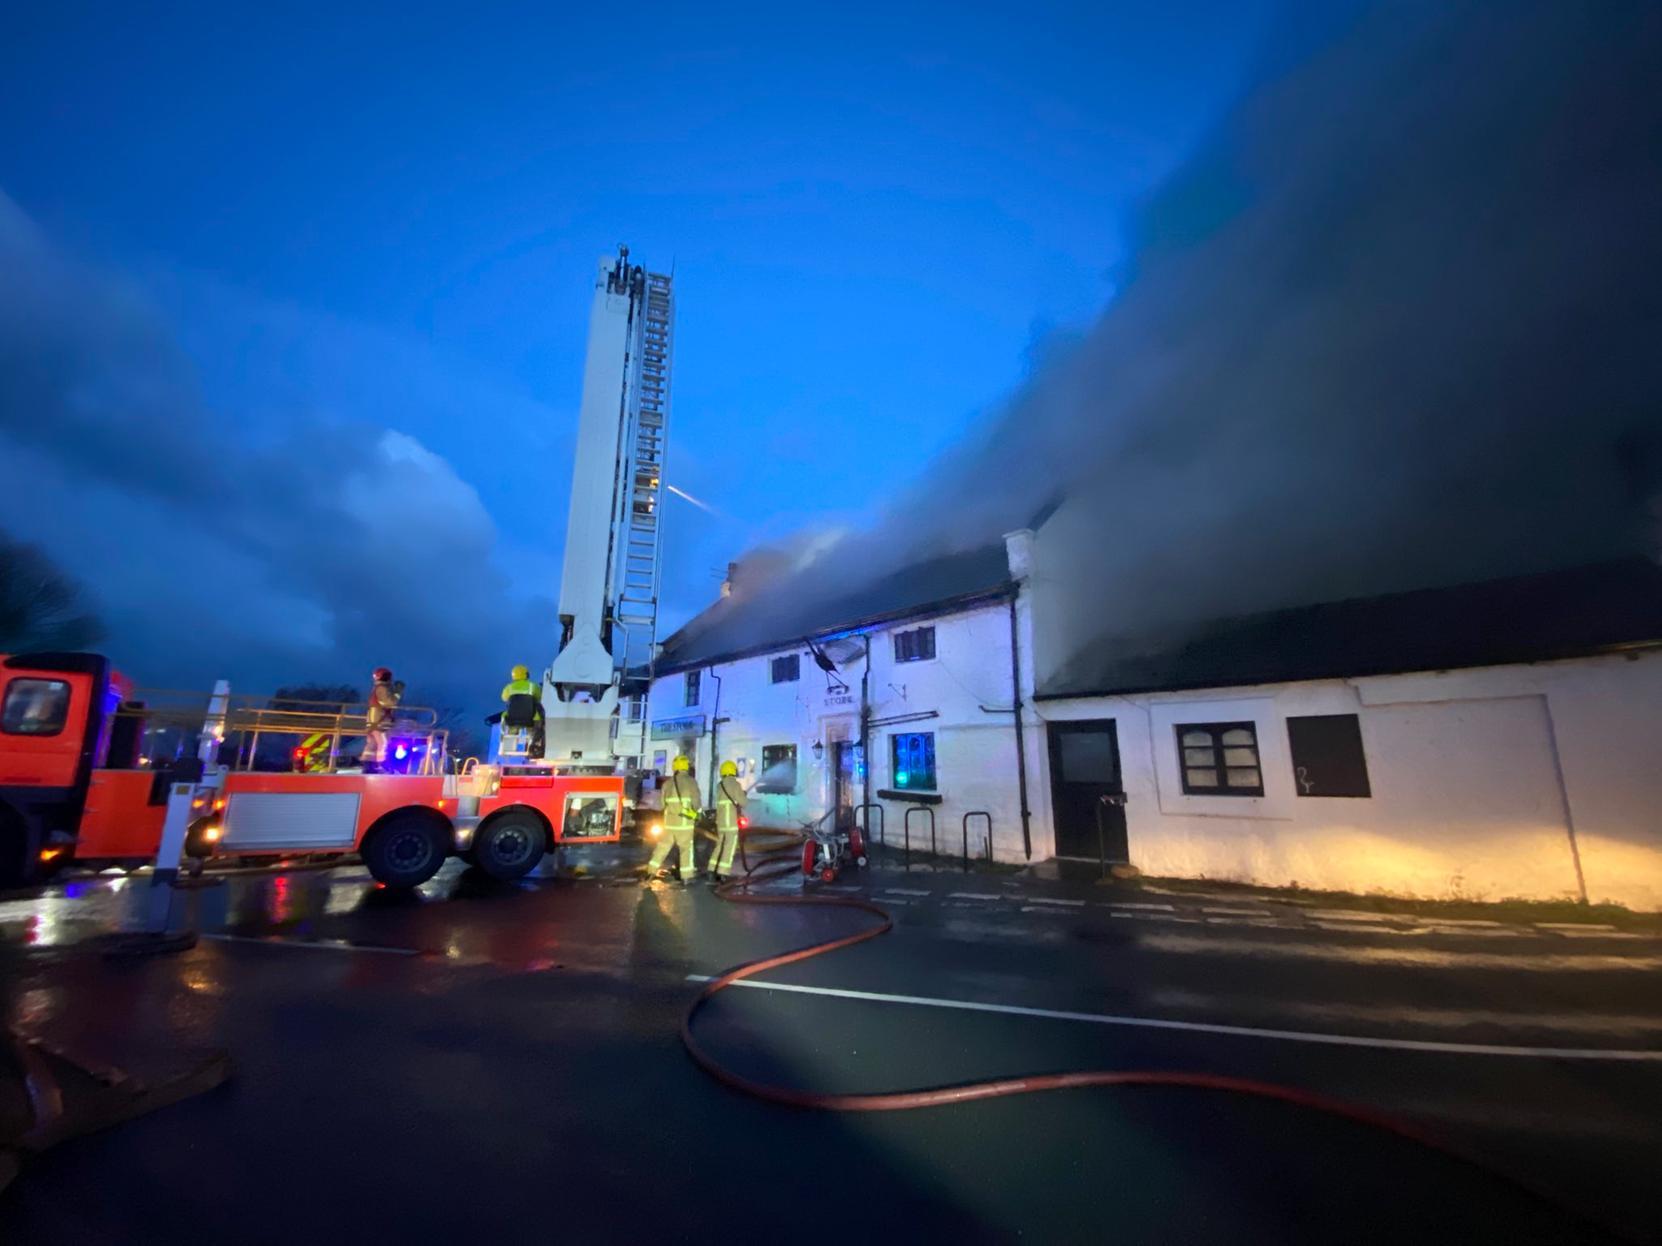 Plumes of thick black smoke filled the surrounding area as a result of the fire.
Copyright: Lancashire Fire and Rescue Service